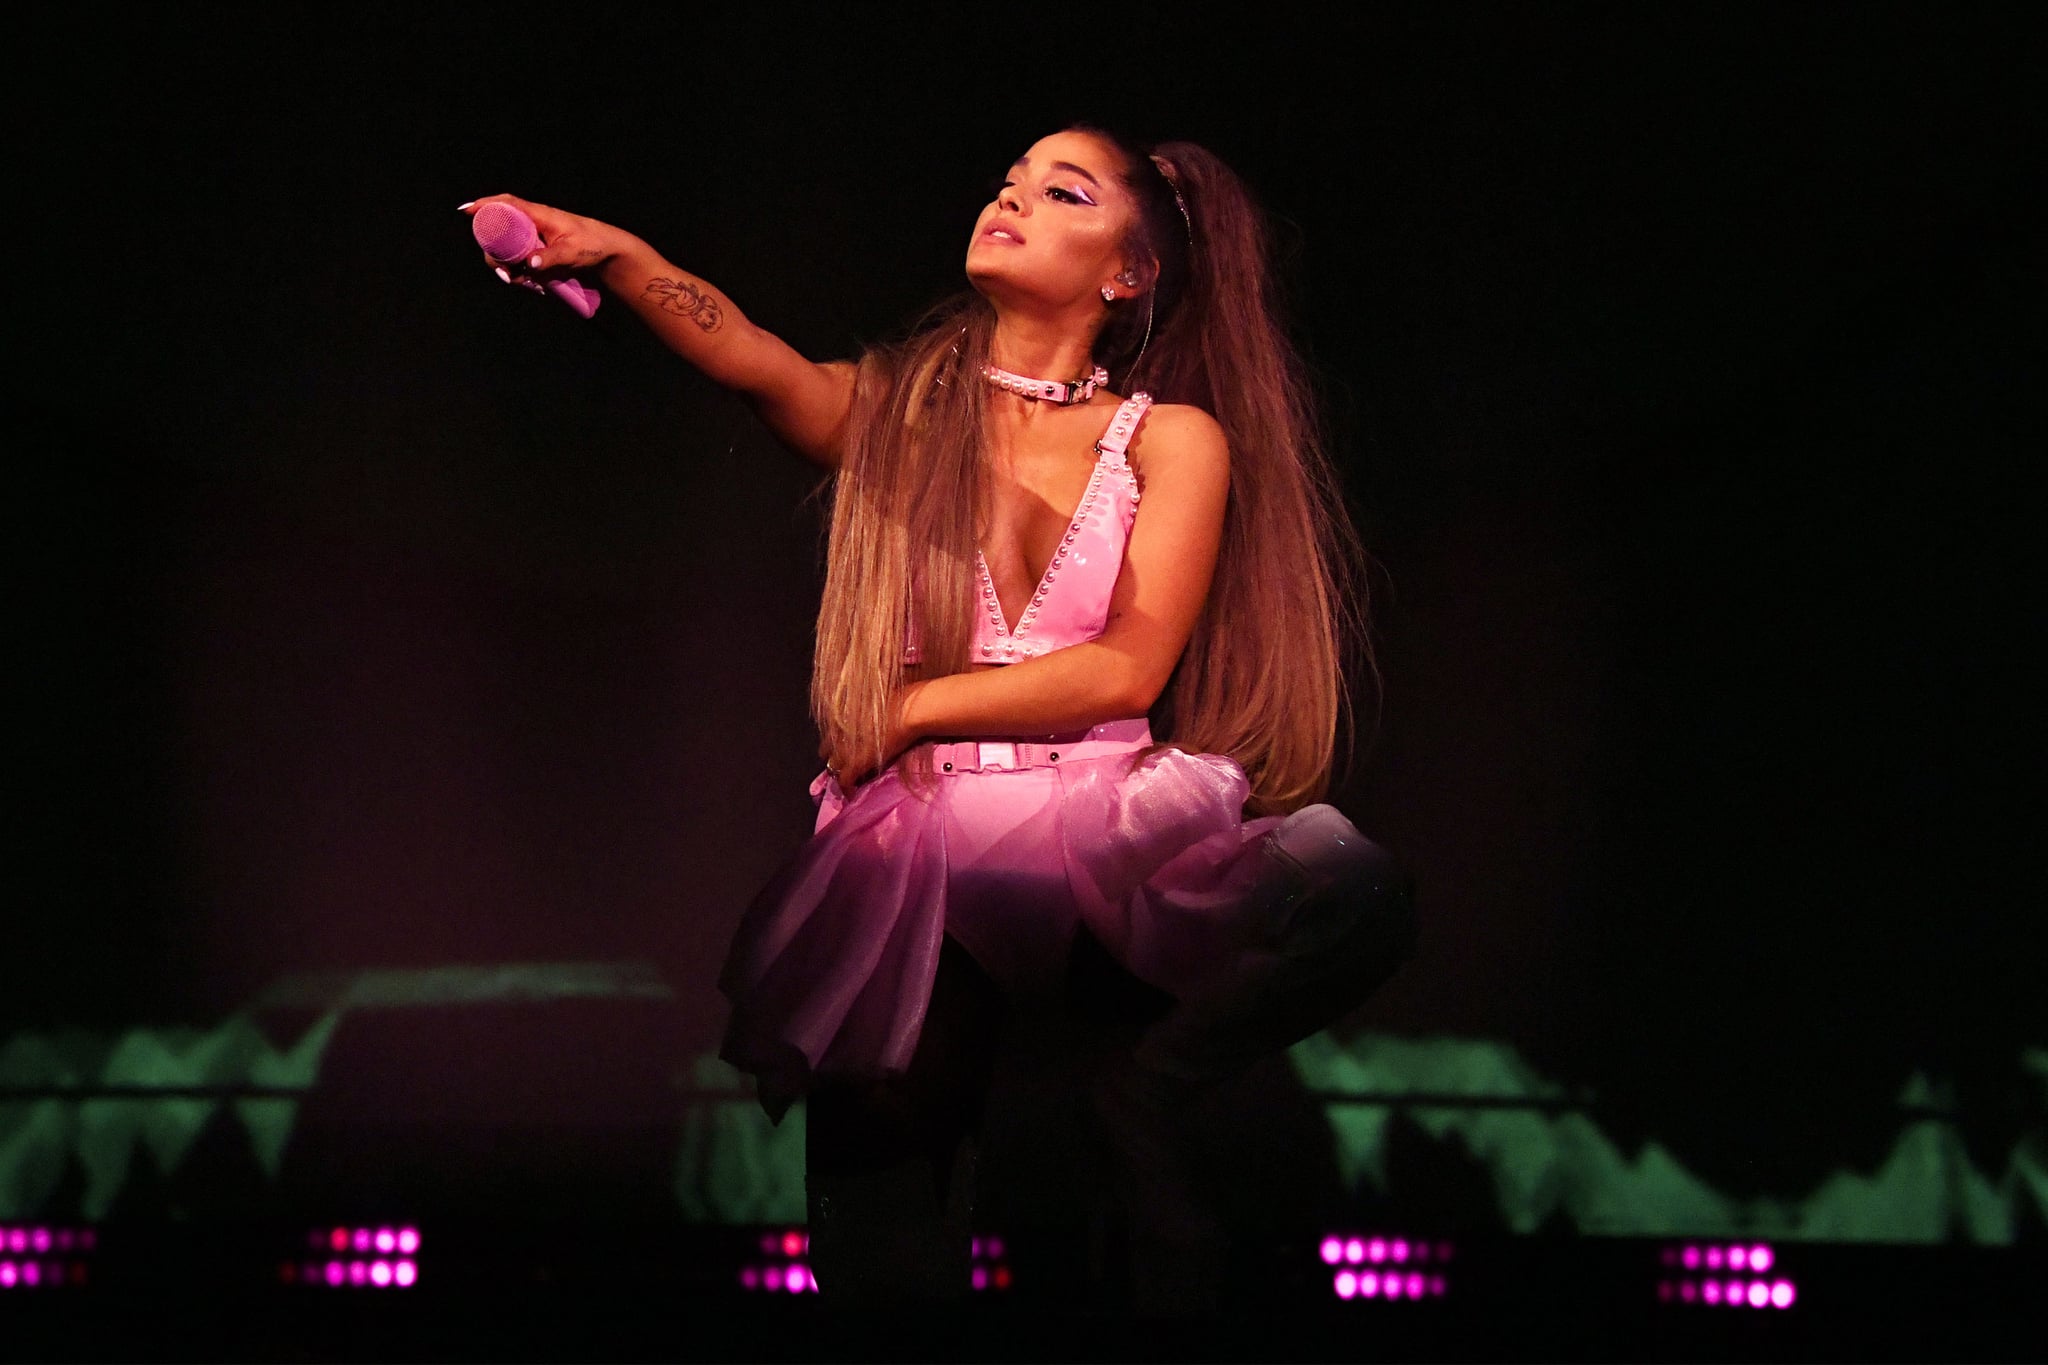 ALBANY, NEW YORK - MARCH 18: Ariana Grande performs onstage during the Sweetener World Tour - Opening Night at Times Union Centre on March 18, 2019 in Albany, New York. (Photo by Kevin Mazur/Getty Images for Ariana Grande)